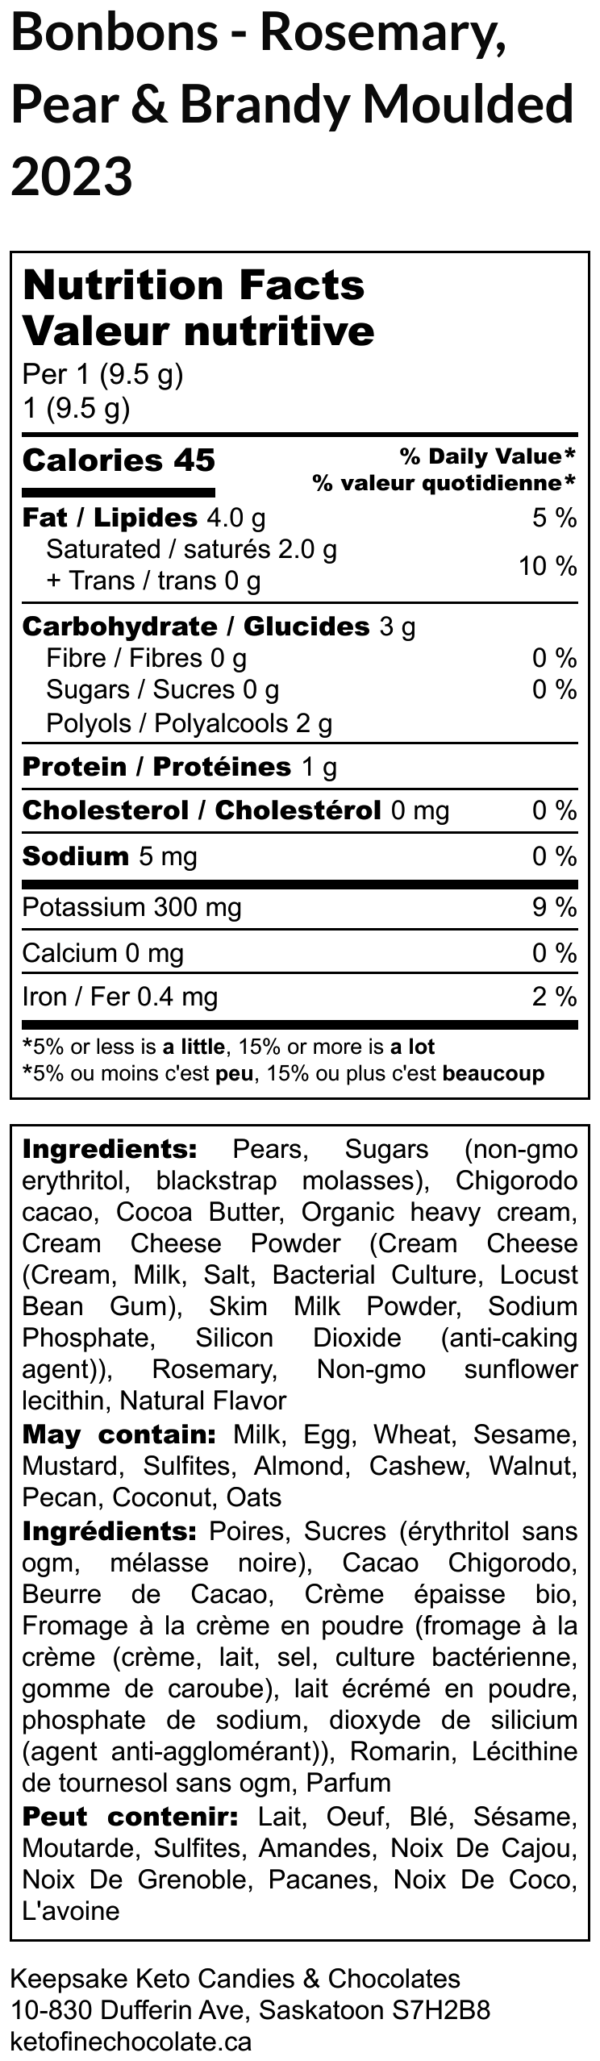 Bonbons - Rosemary- Pear & Brandy Moulded 2023 - Nutrition Label